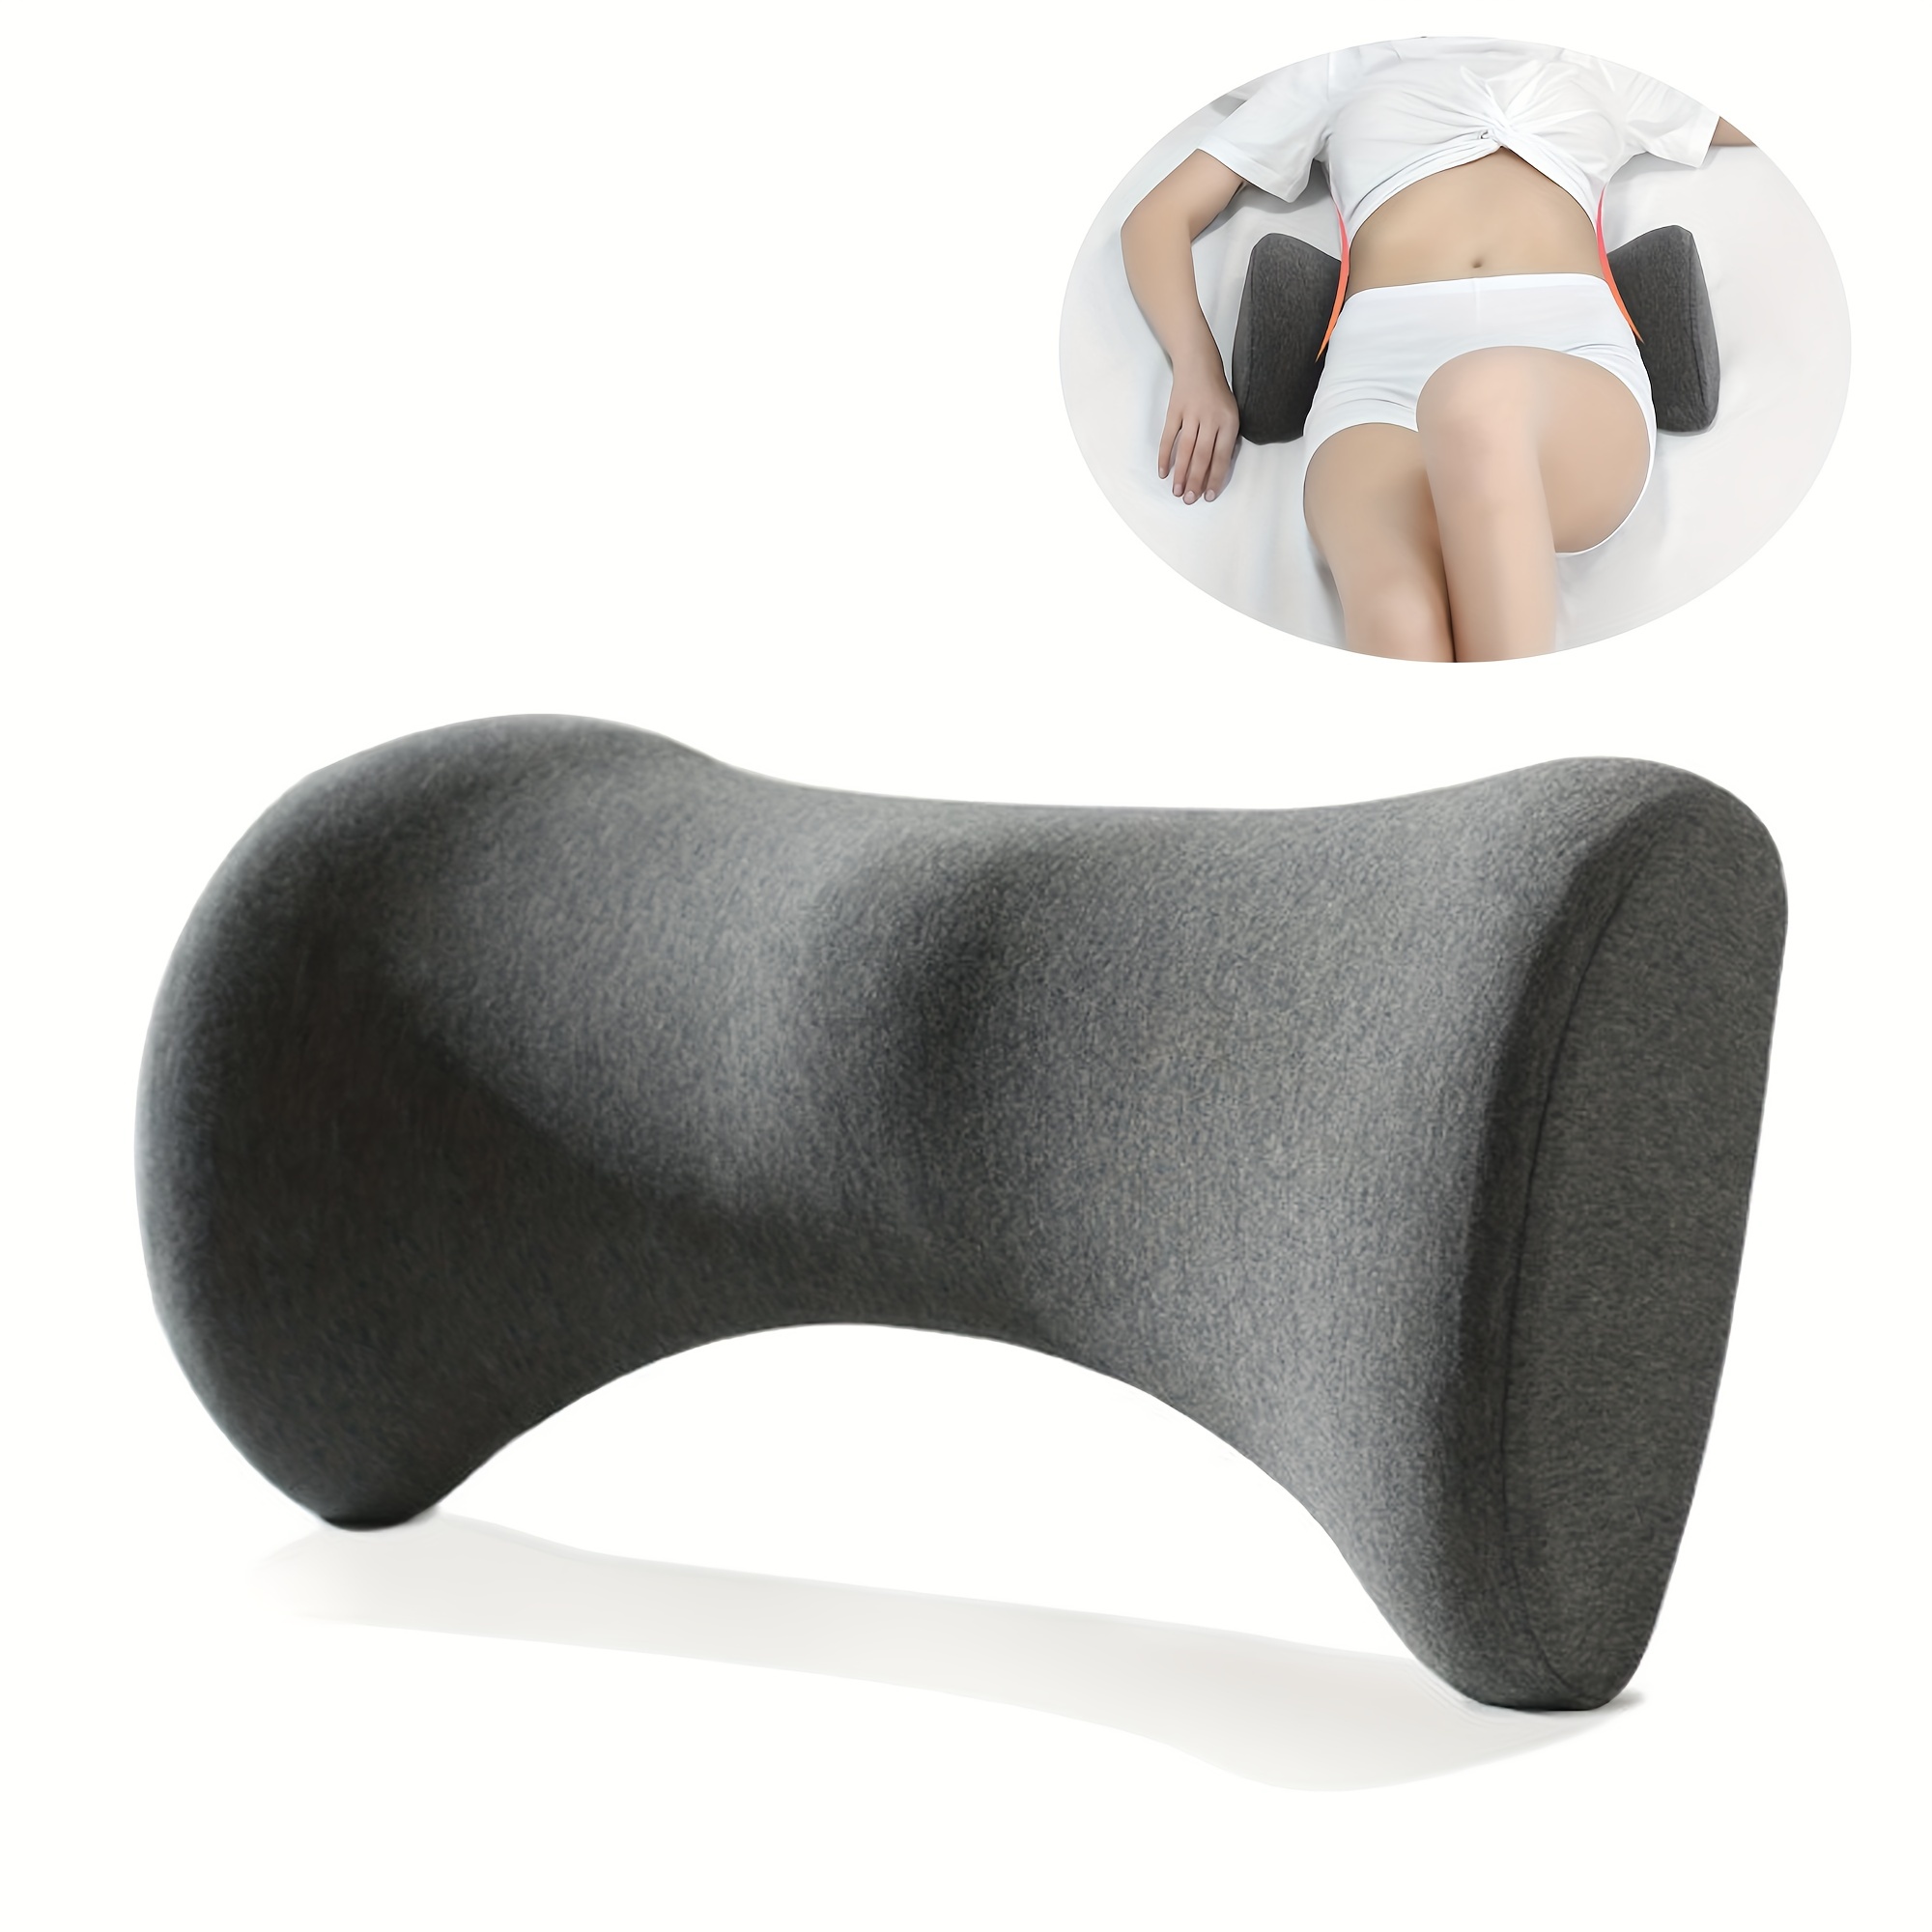 Lumbar Support Pillow For Low Back Pain Relief And Sciatic Nerve Pain  Relief, Back Support Cushion